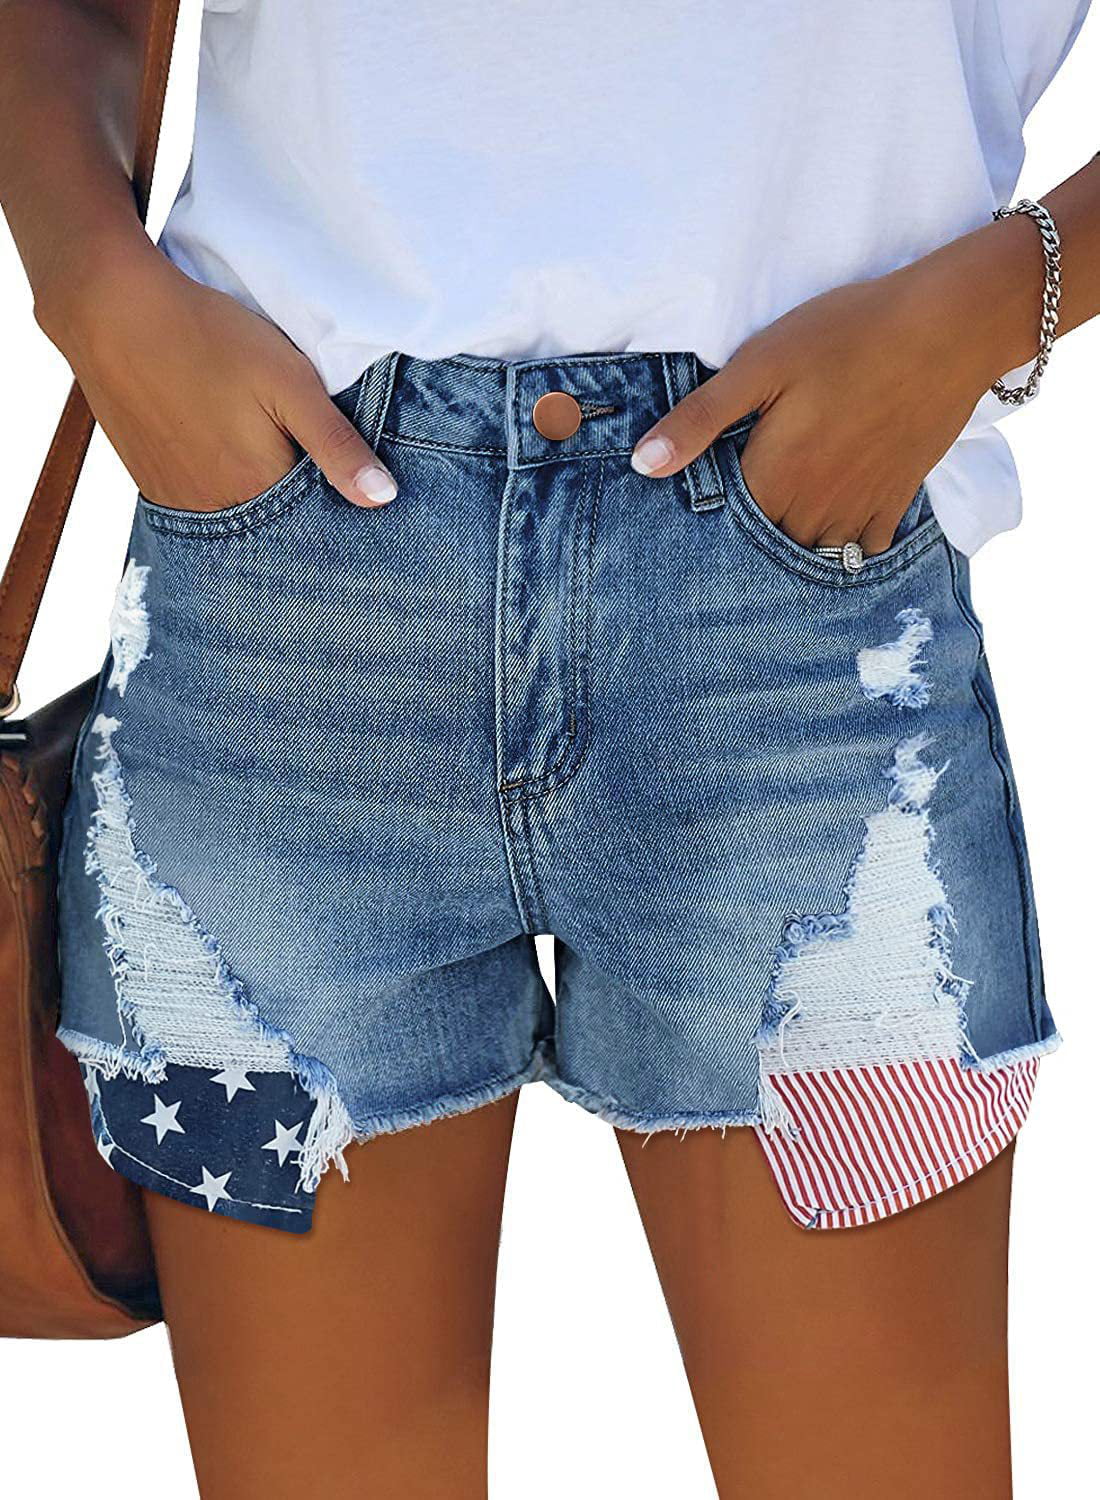 Denim Shorts for Women Distressed Ripped Jean Shorts Stretchy Frayed Raw Hem Hot Short Jeans with Pockets 